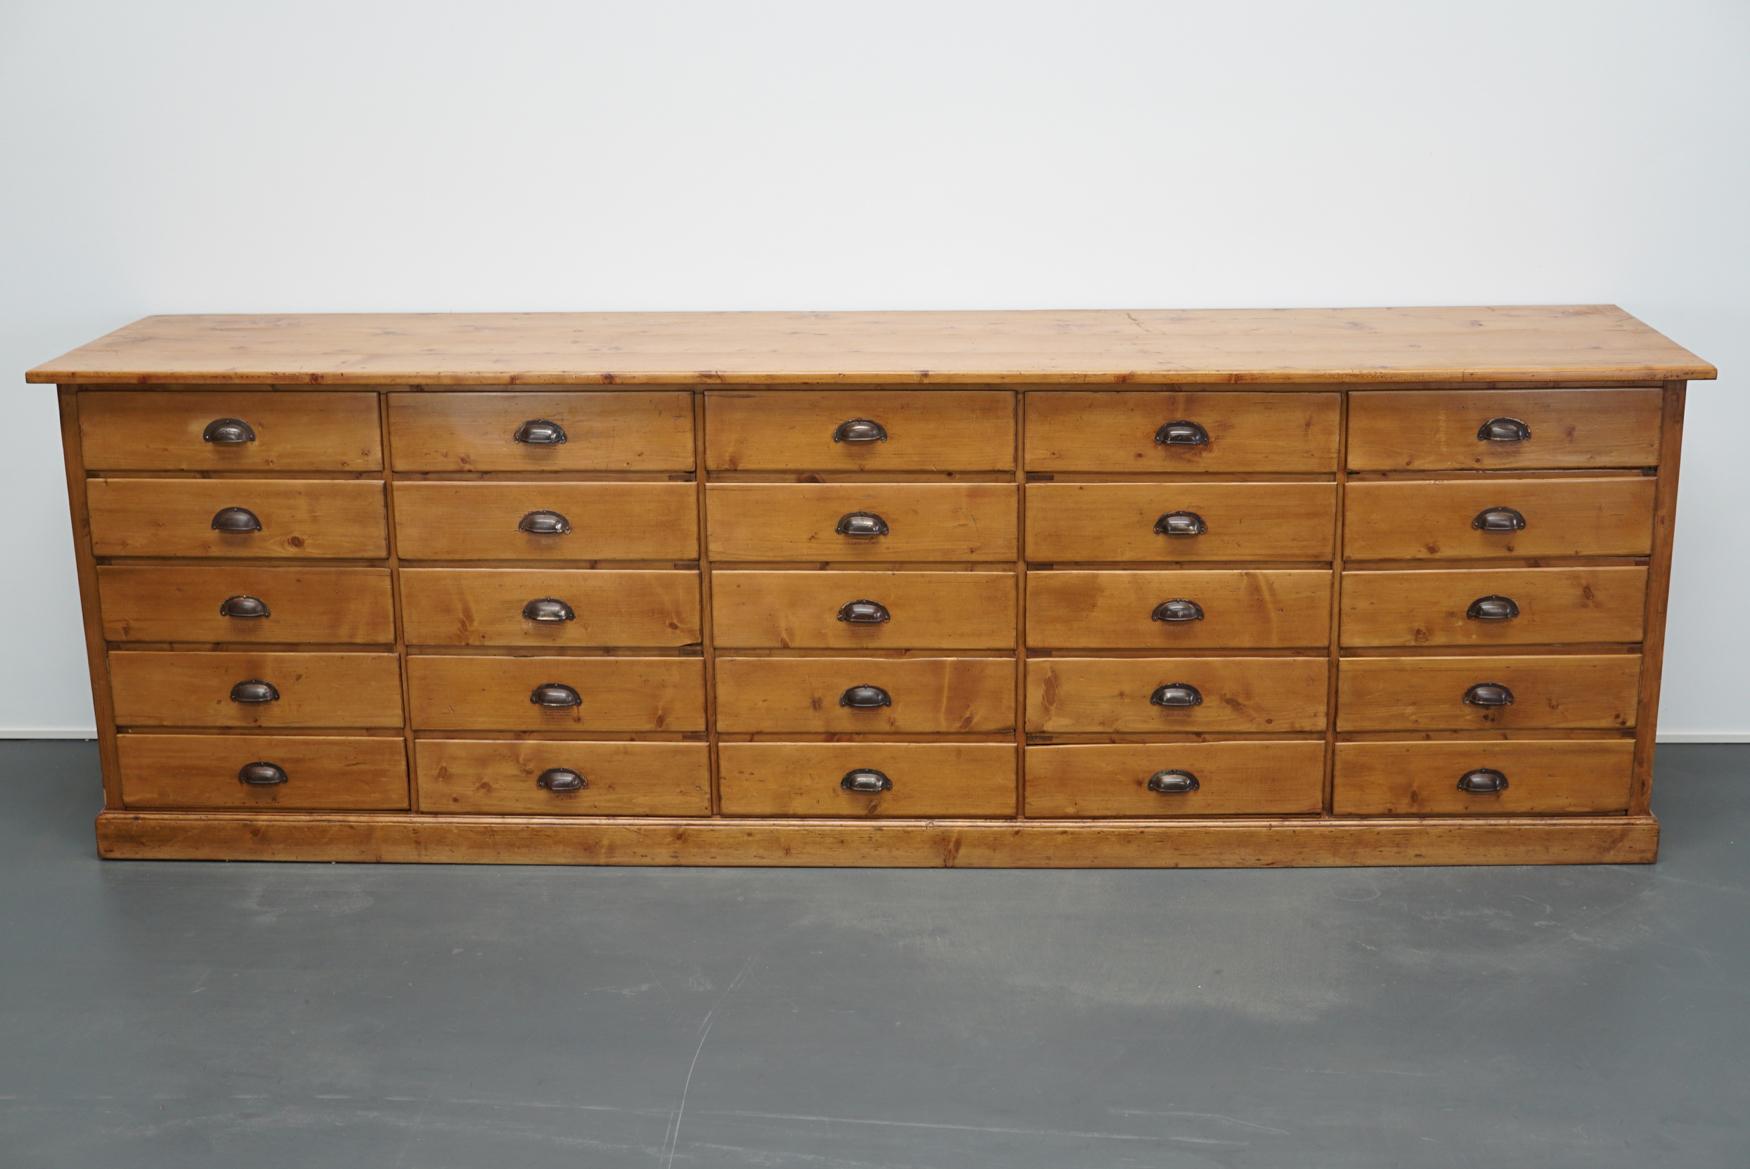 This apothecary cabinet of drawers was designed and made around the 1930s in France. The piece is made from pine and features drawers with metal cup handles. The interior dimensions of the drawers are: DWH 56 x 51 x 11.5 cm.